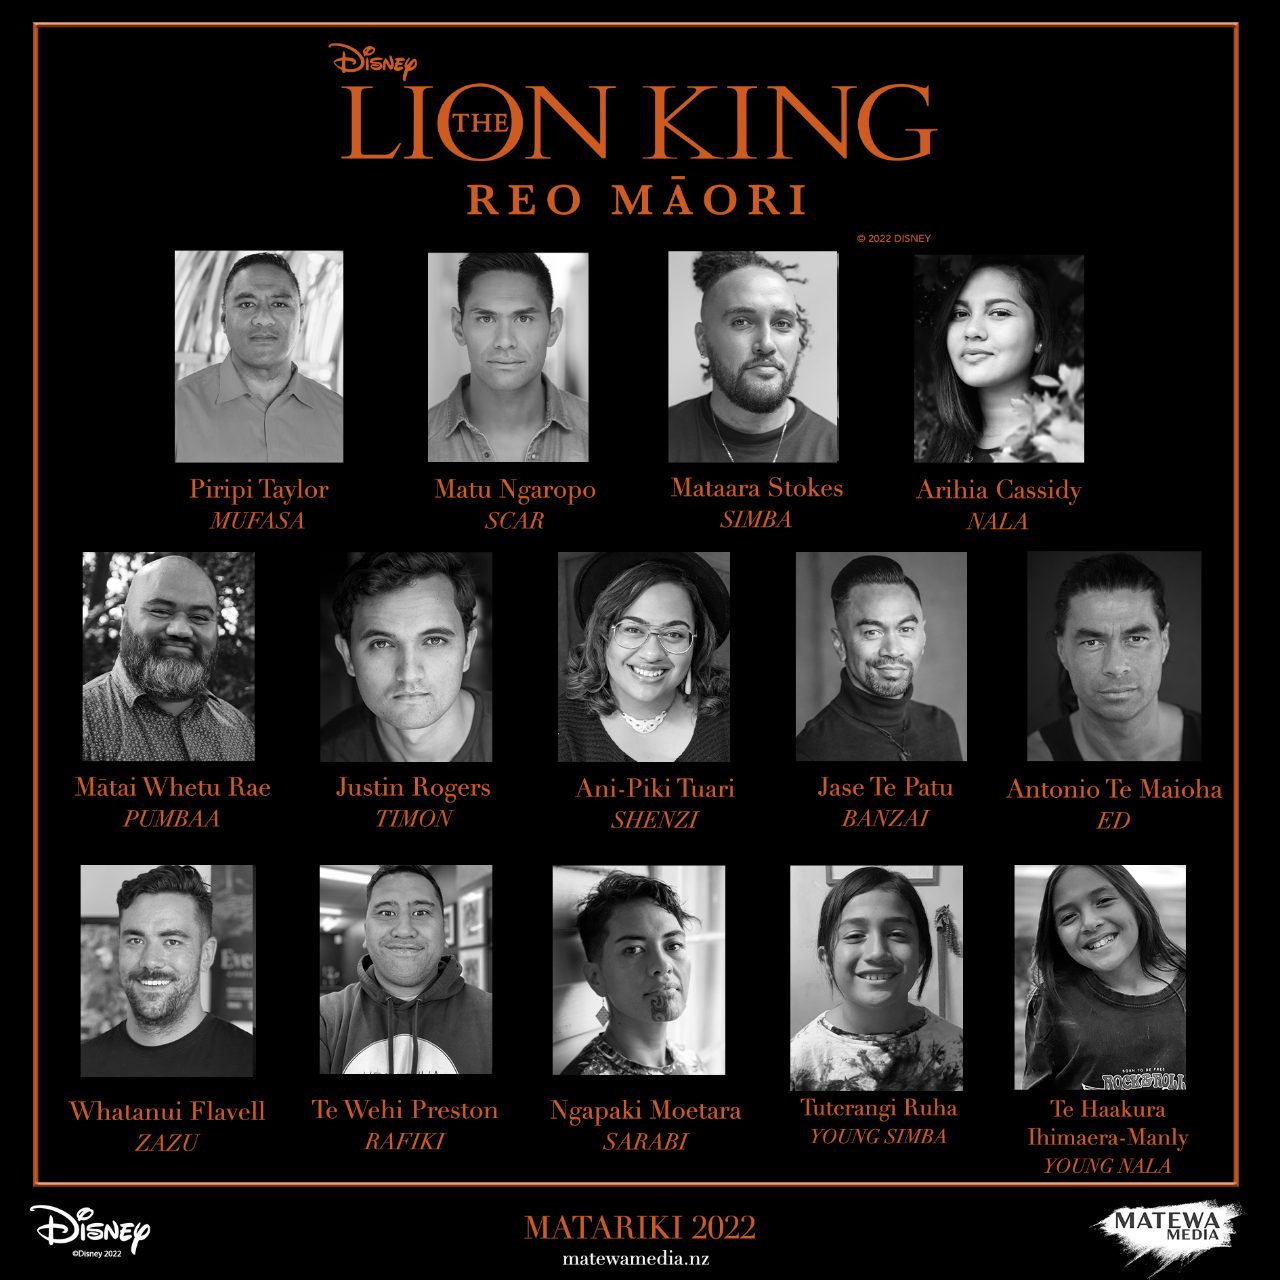 The Lion King Reo Māori cast has just been announced